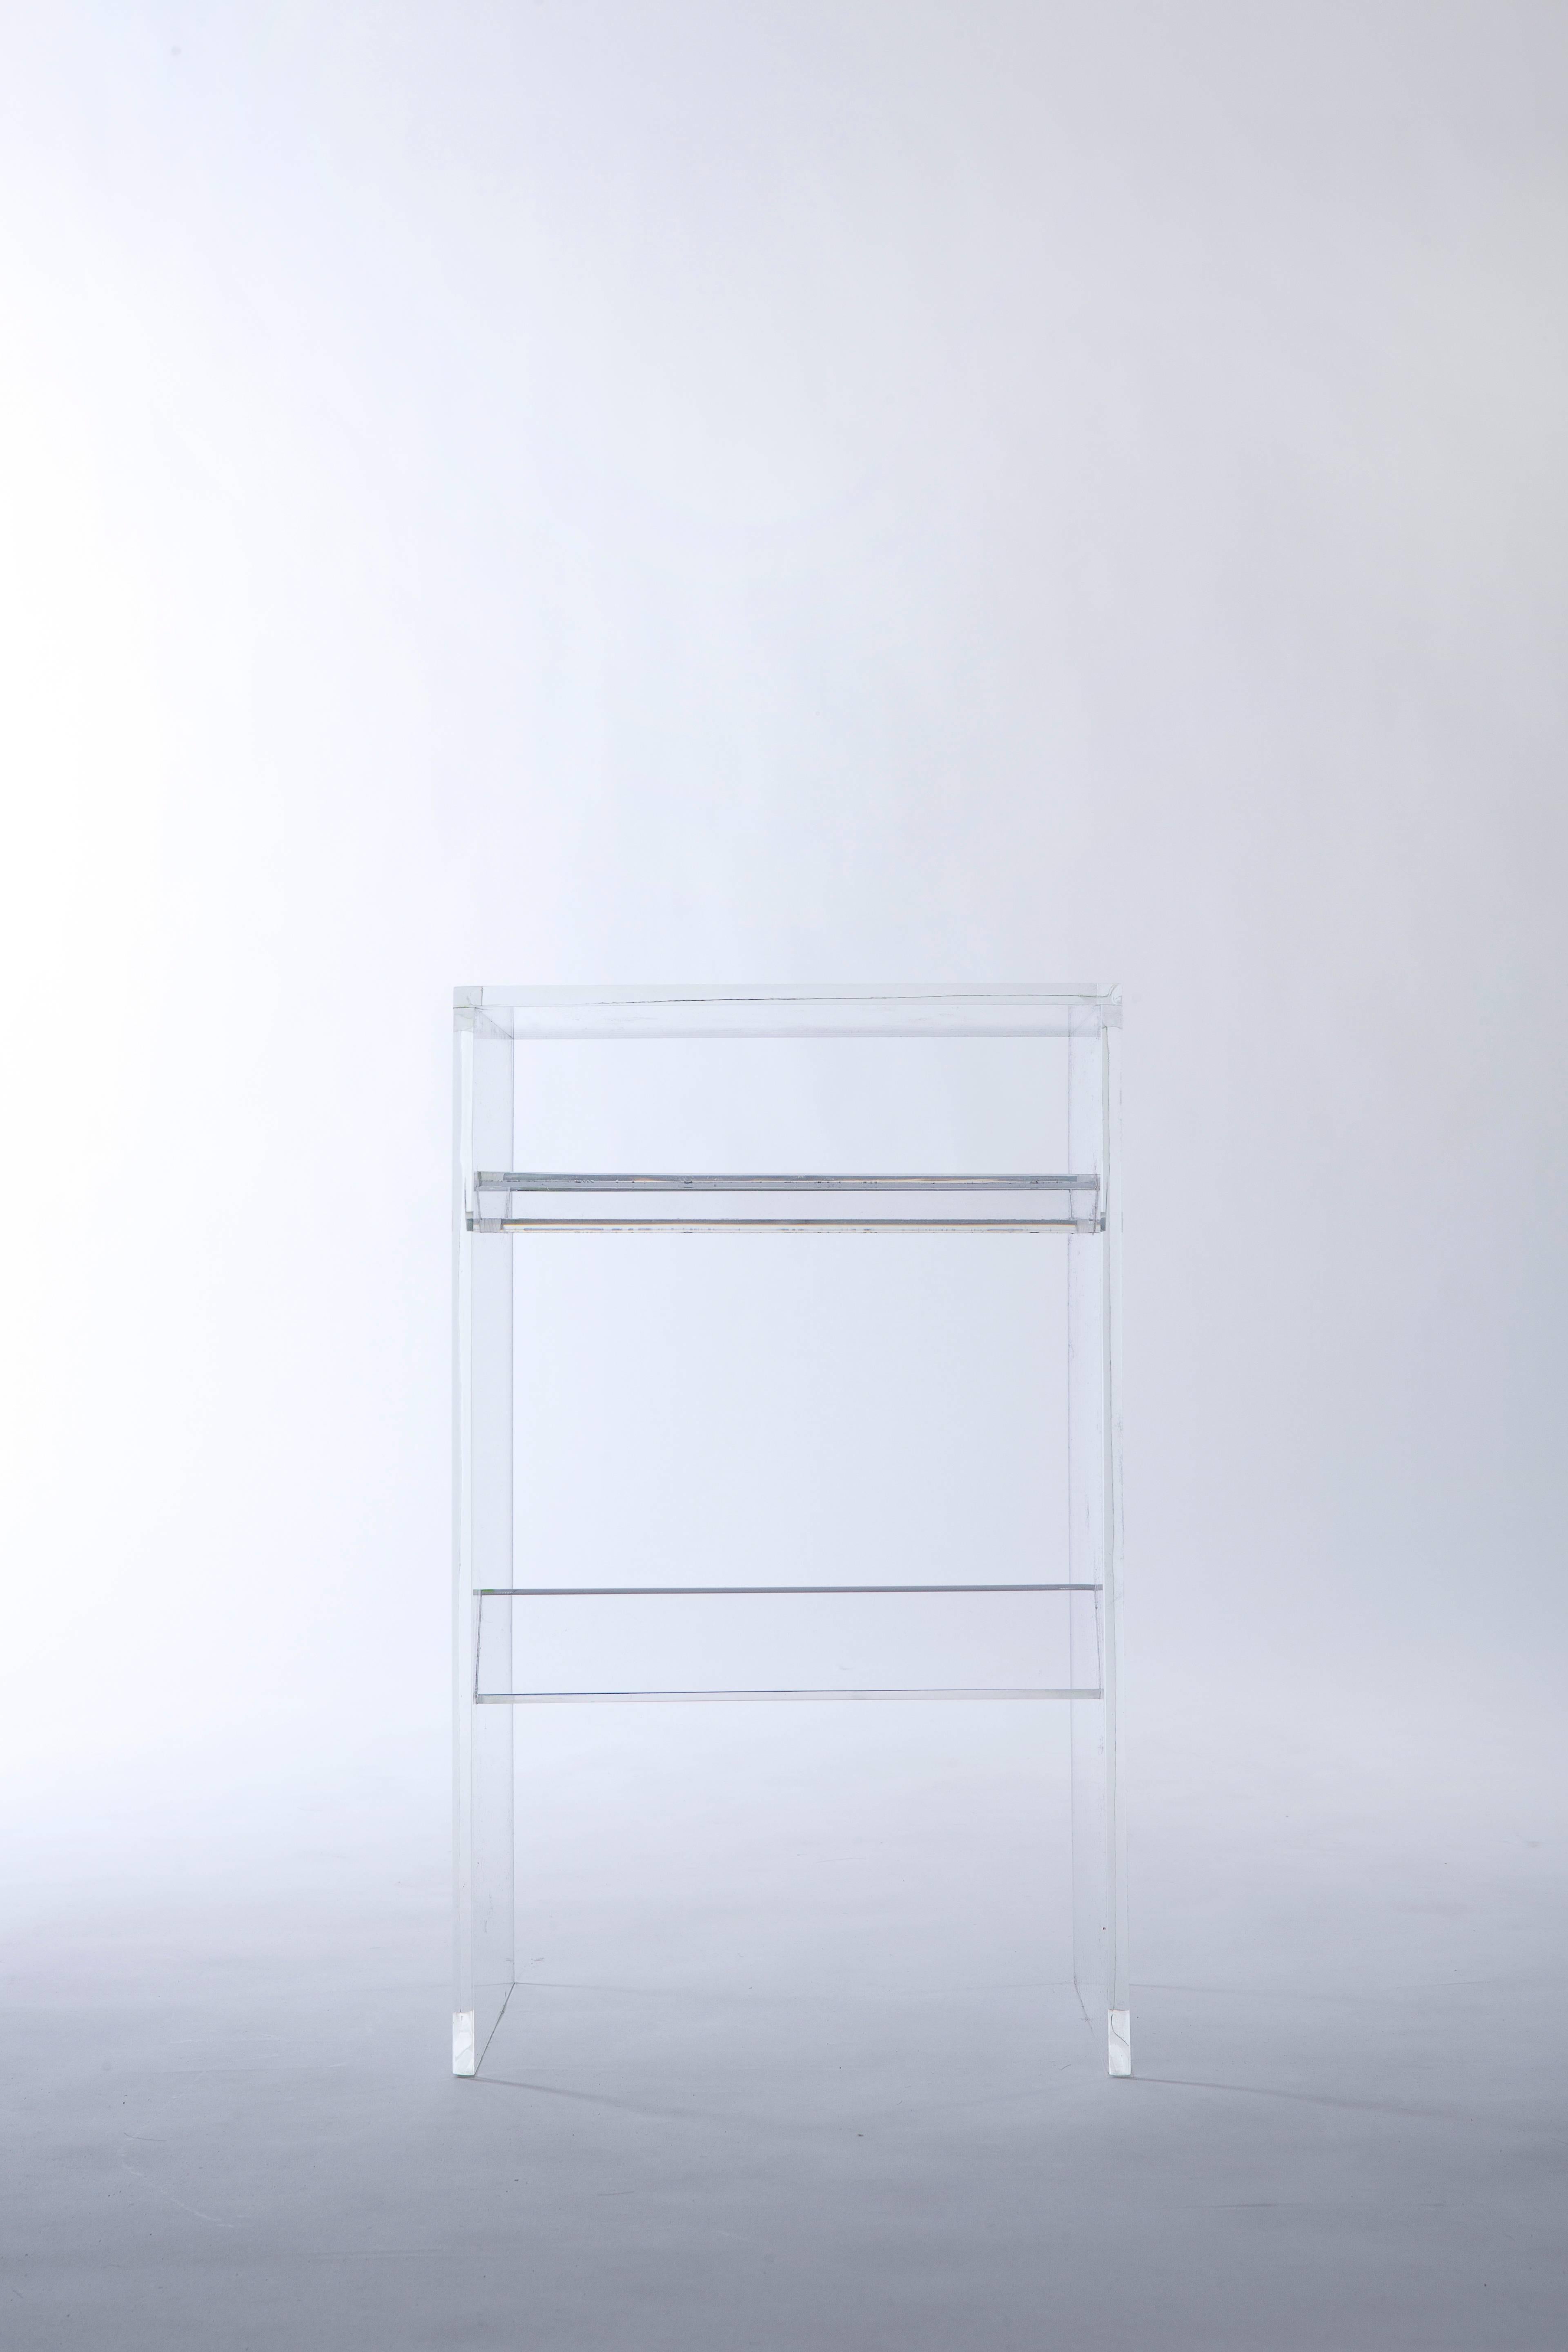 'The Stooble' is cross between a stool and a side table that is both functionally and aesthetically flexible.  

Like the other members of our 'Bond Series', the completely transparent acrylic Stooble is defined by the trough nestled underneath its